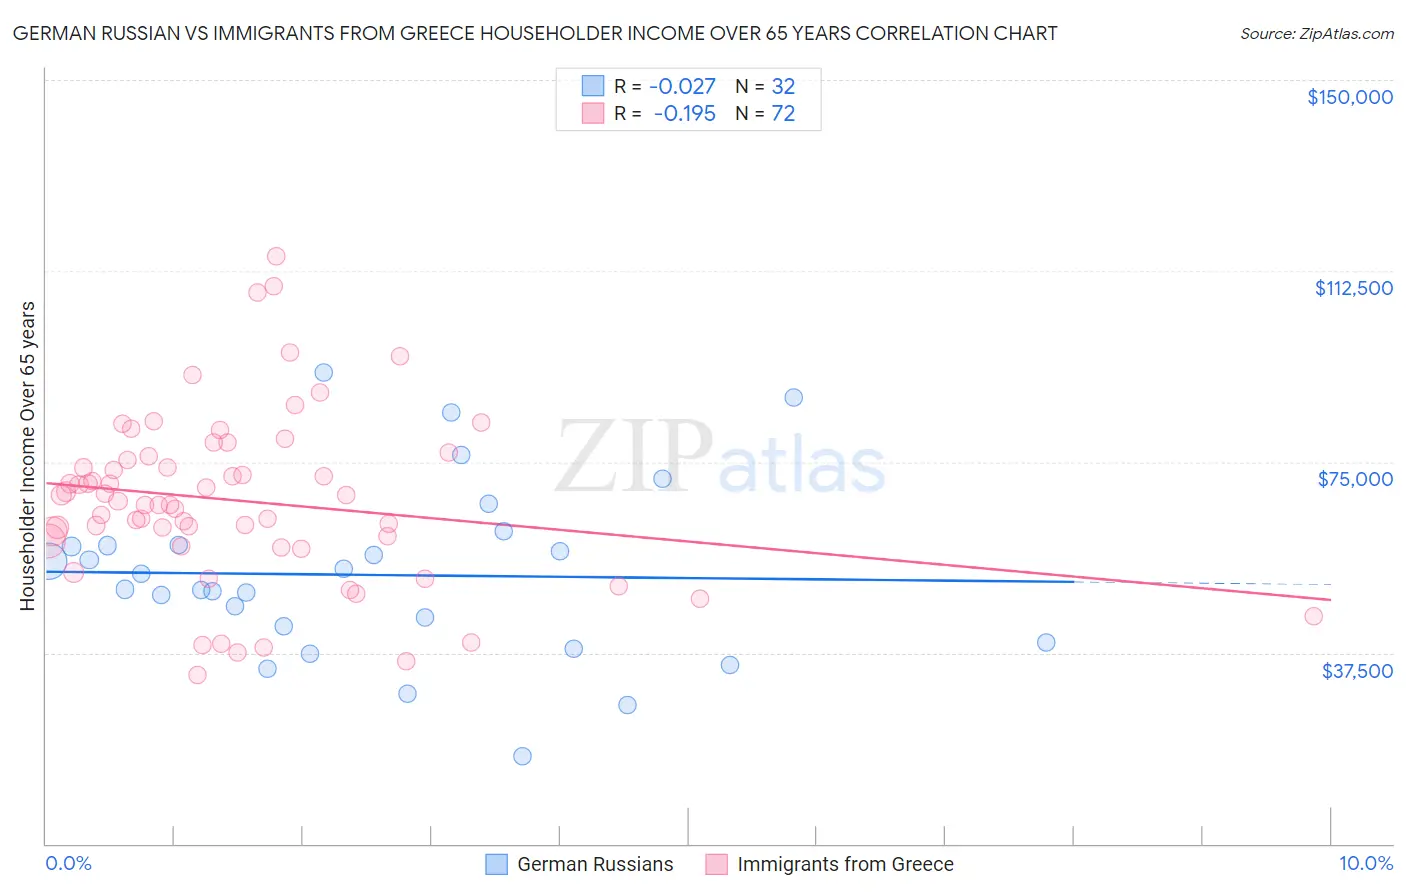 German Russian vs Immigrants from Greece Householder Income Over 65 years